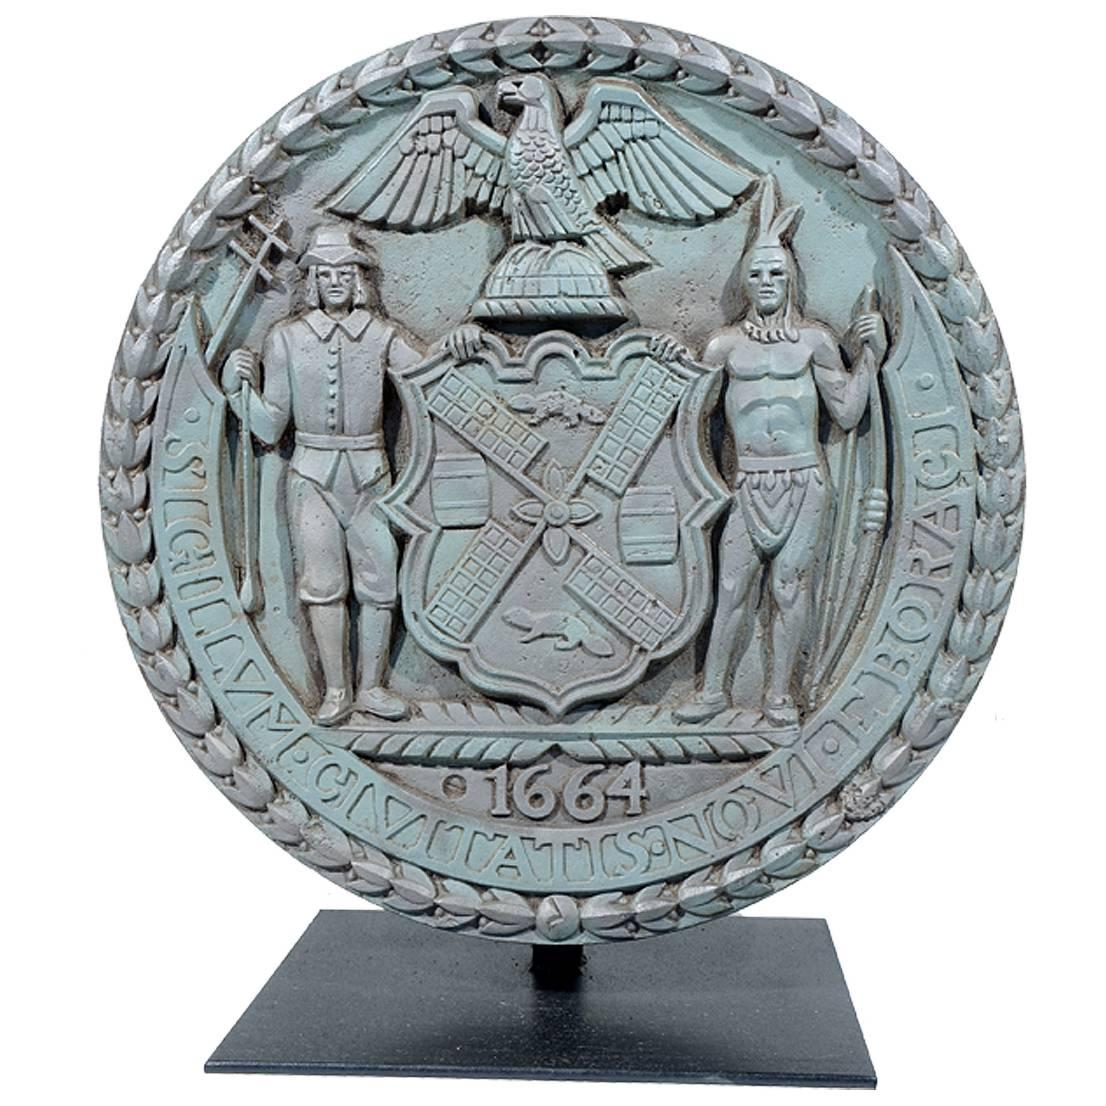 WPA-Era Cast Iron Ornamental Plaque from NYC West Side Highway